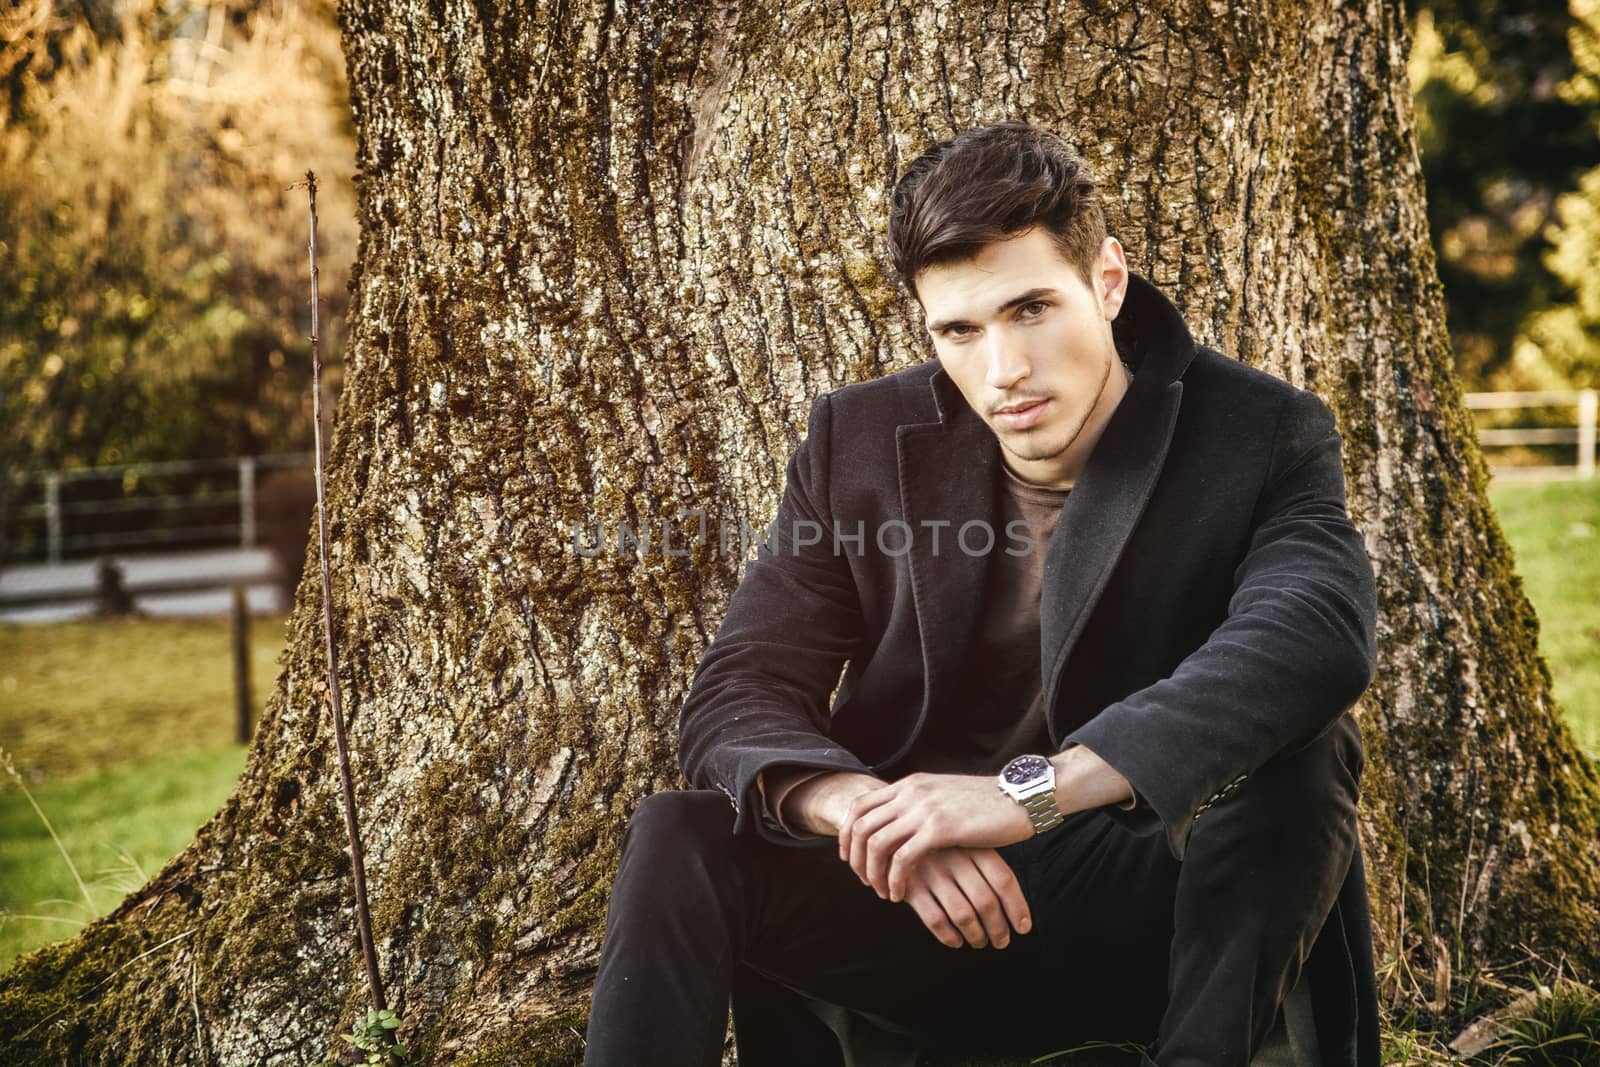 Handsome young man leaning against tree, looking at camera, in a sunny day wearing a black coat